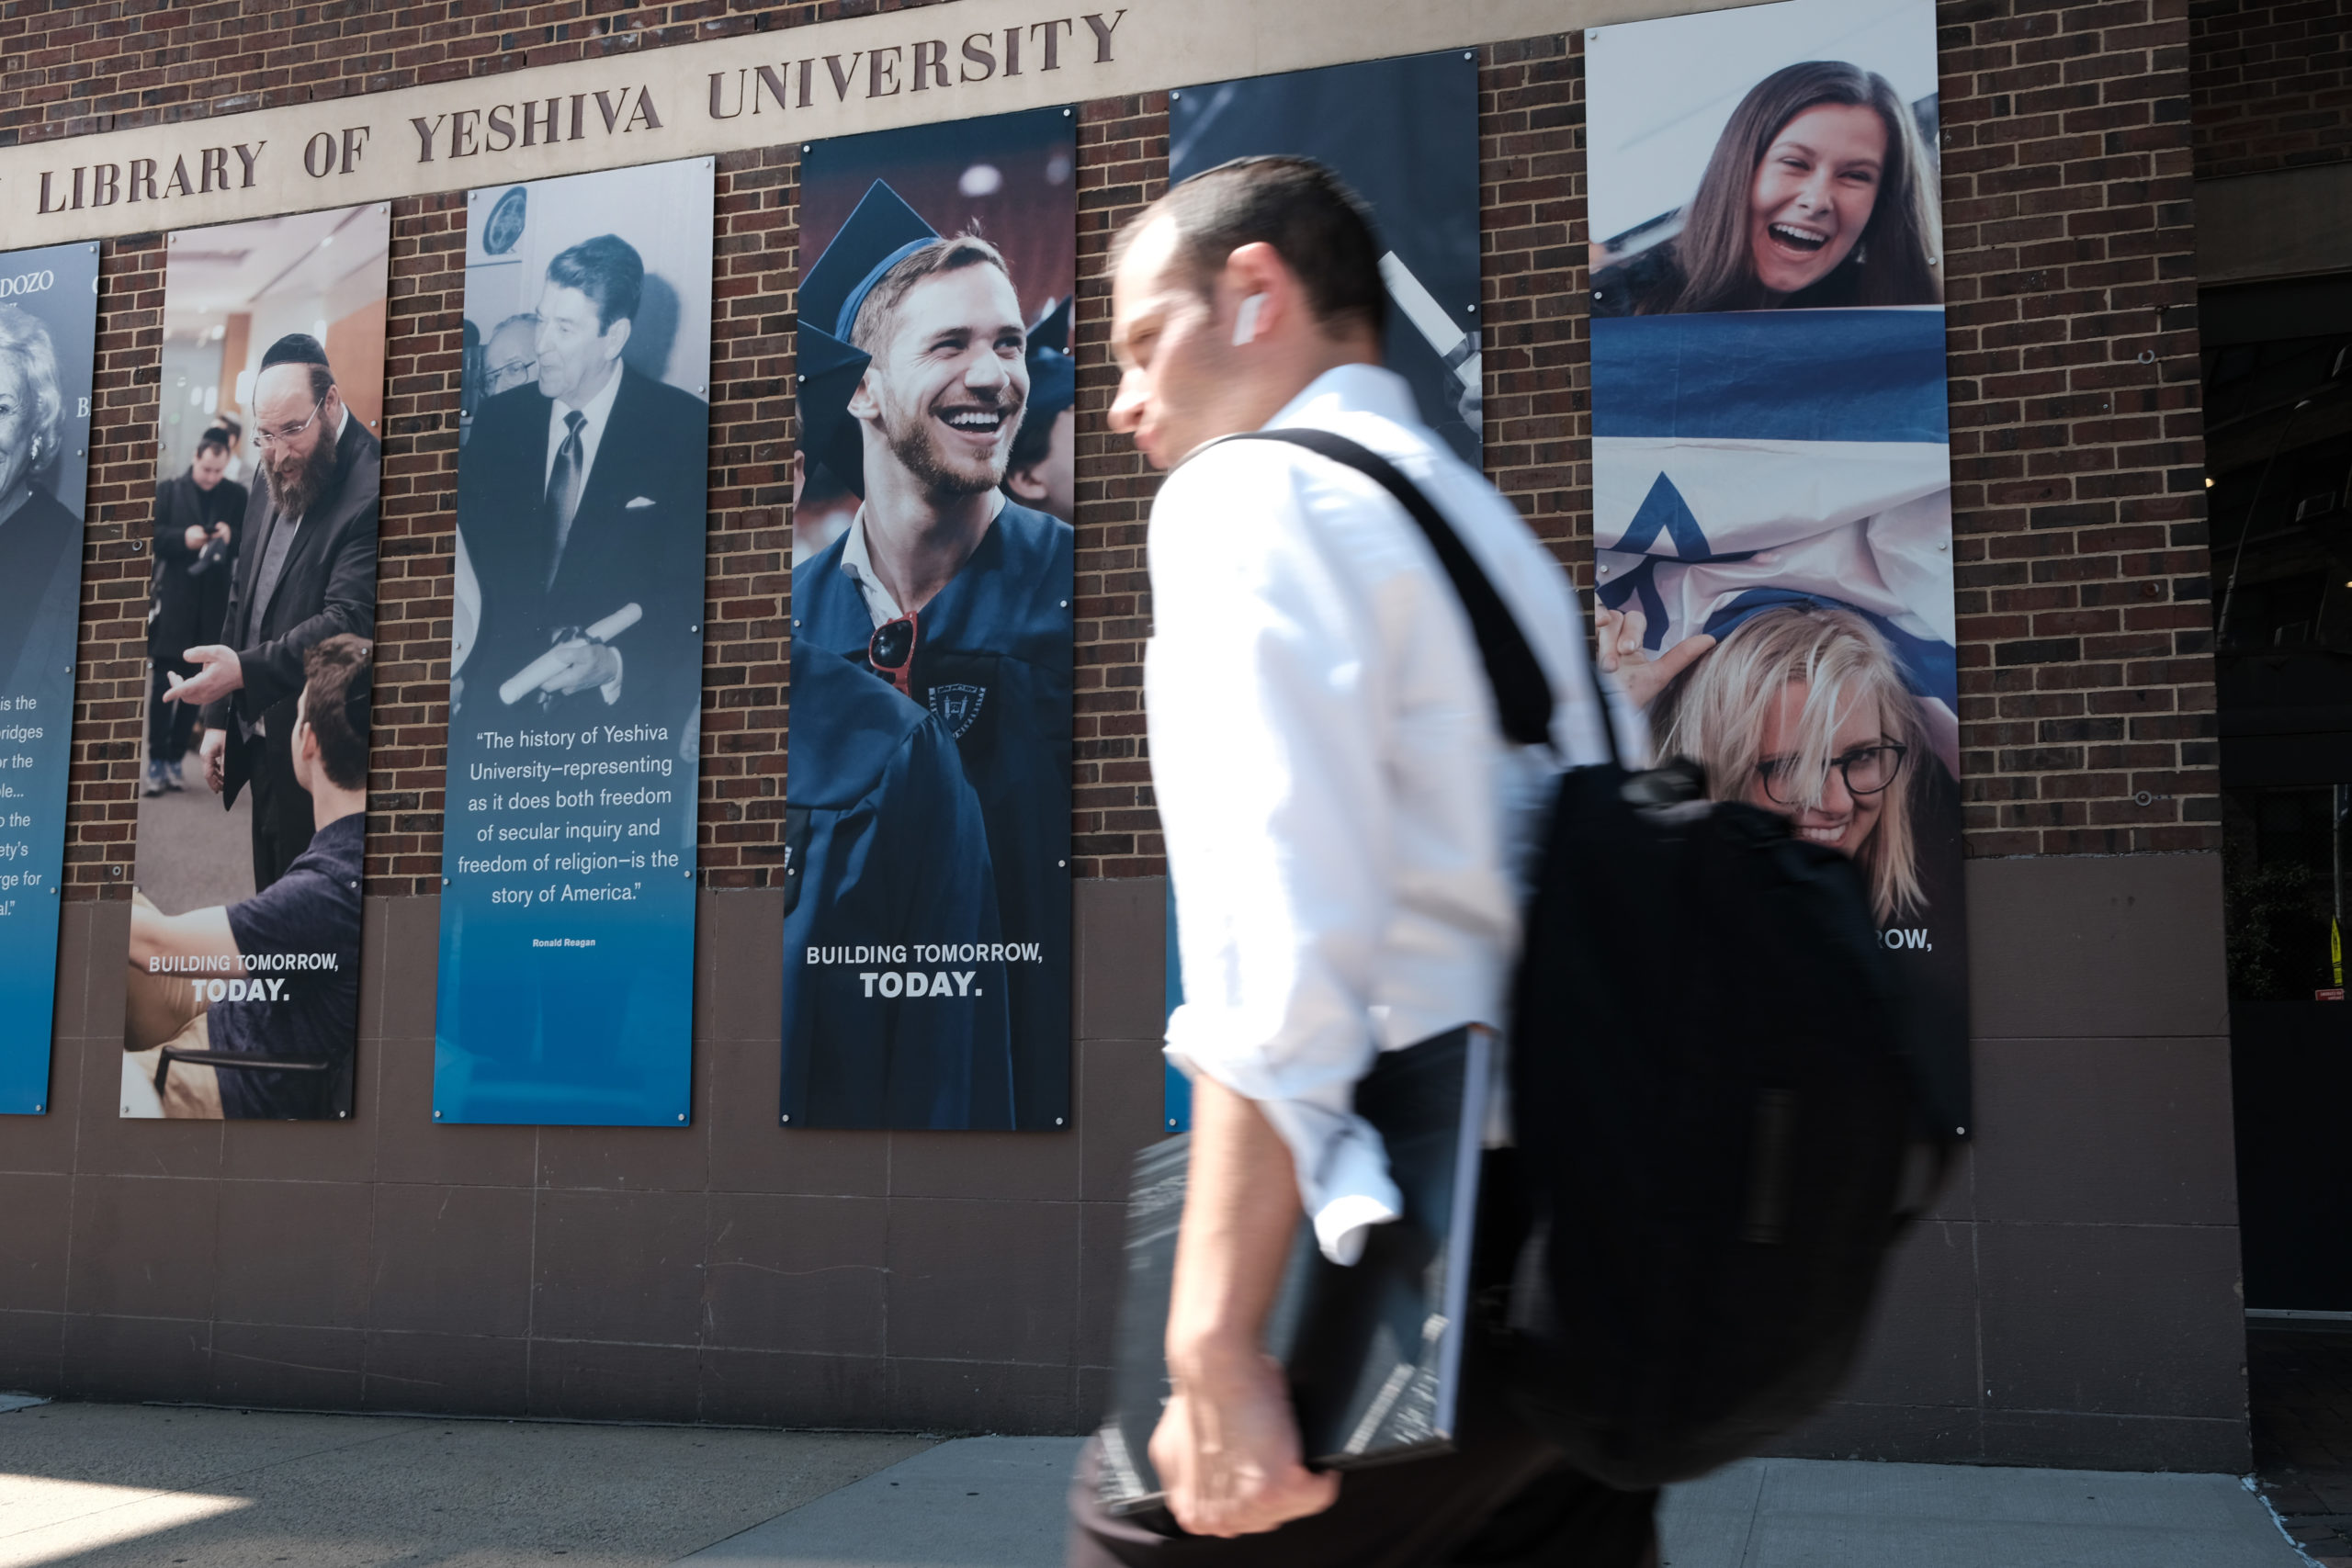 People walk by the campus of Yeshiva University in New York City on August 30, 2022 in New York City. Yeshiva University on Monday filed an emergency request with the Supreme Court asking it to block a judge’s order that requires the university to recognize an LGBTQ+ student group. The religious and Jewish university stated in court papers that “Yeshiva cannot comply with that order because doing so would violate its sincere religious beliefs about how to form its undergraduate students in Torah values." (Photo by Spencer Platt/Getty Images)